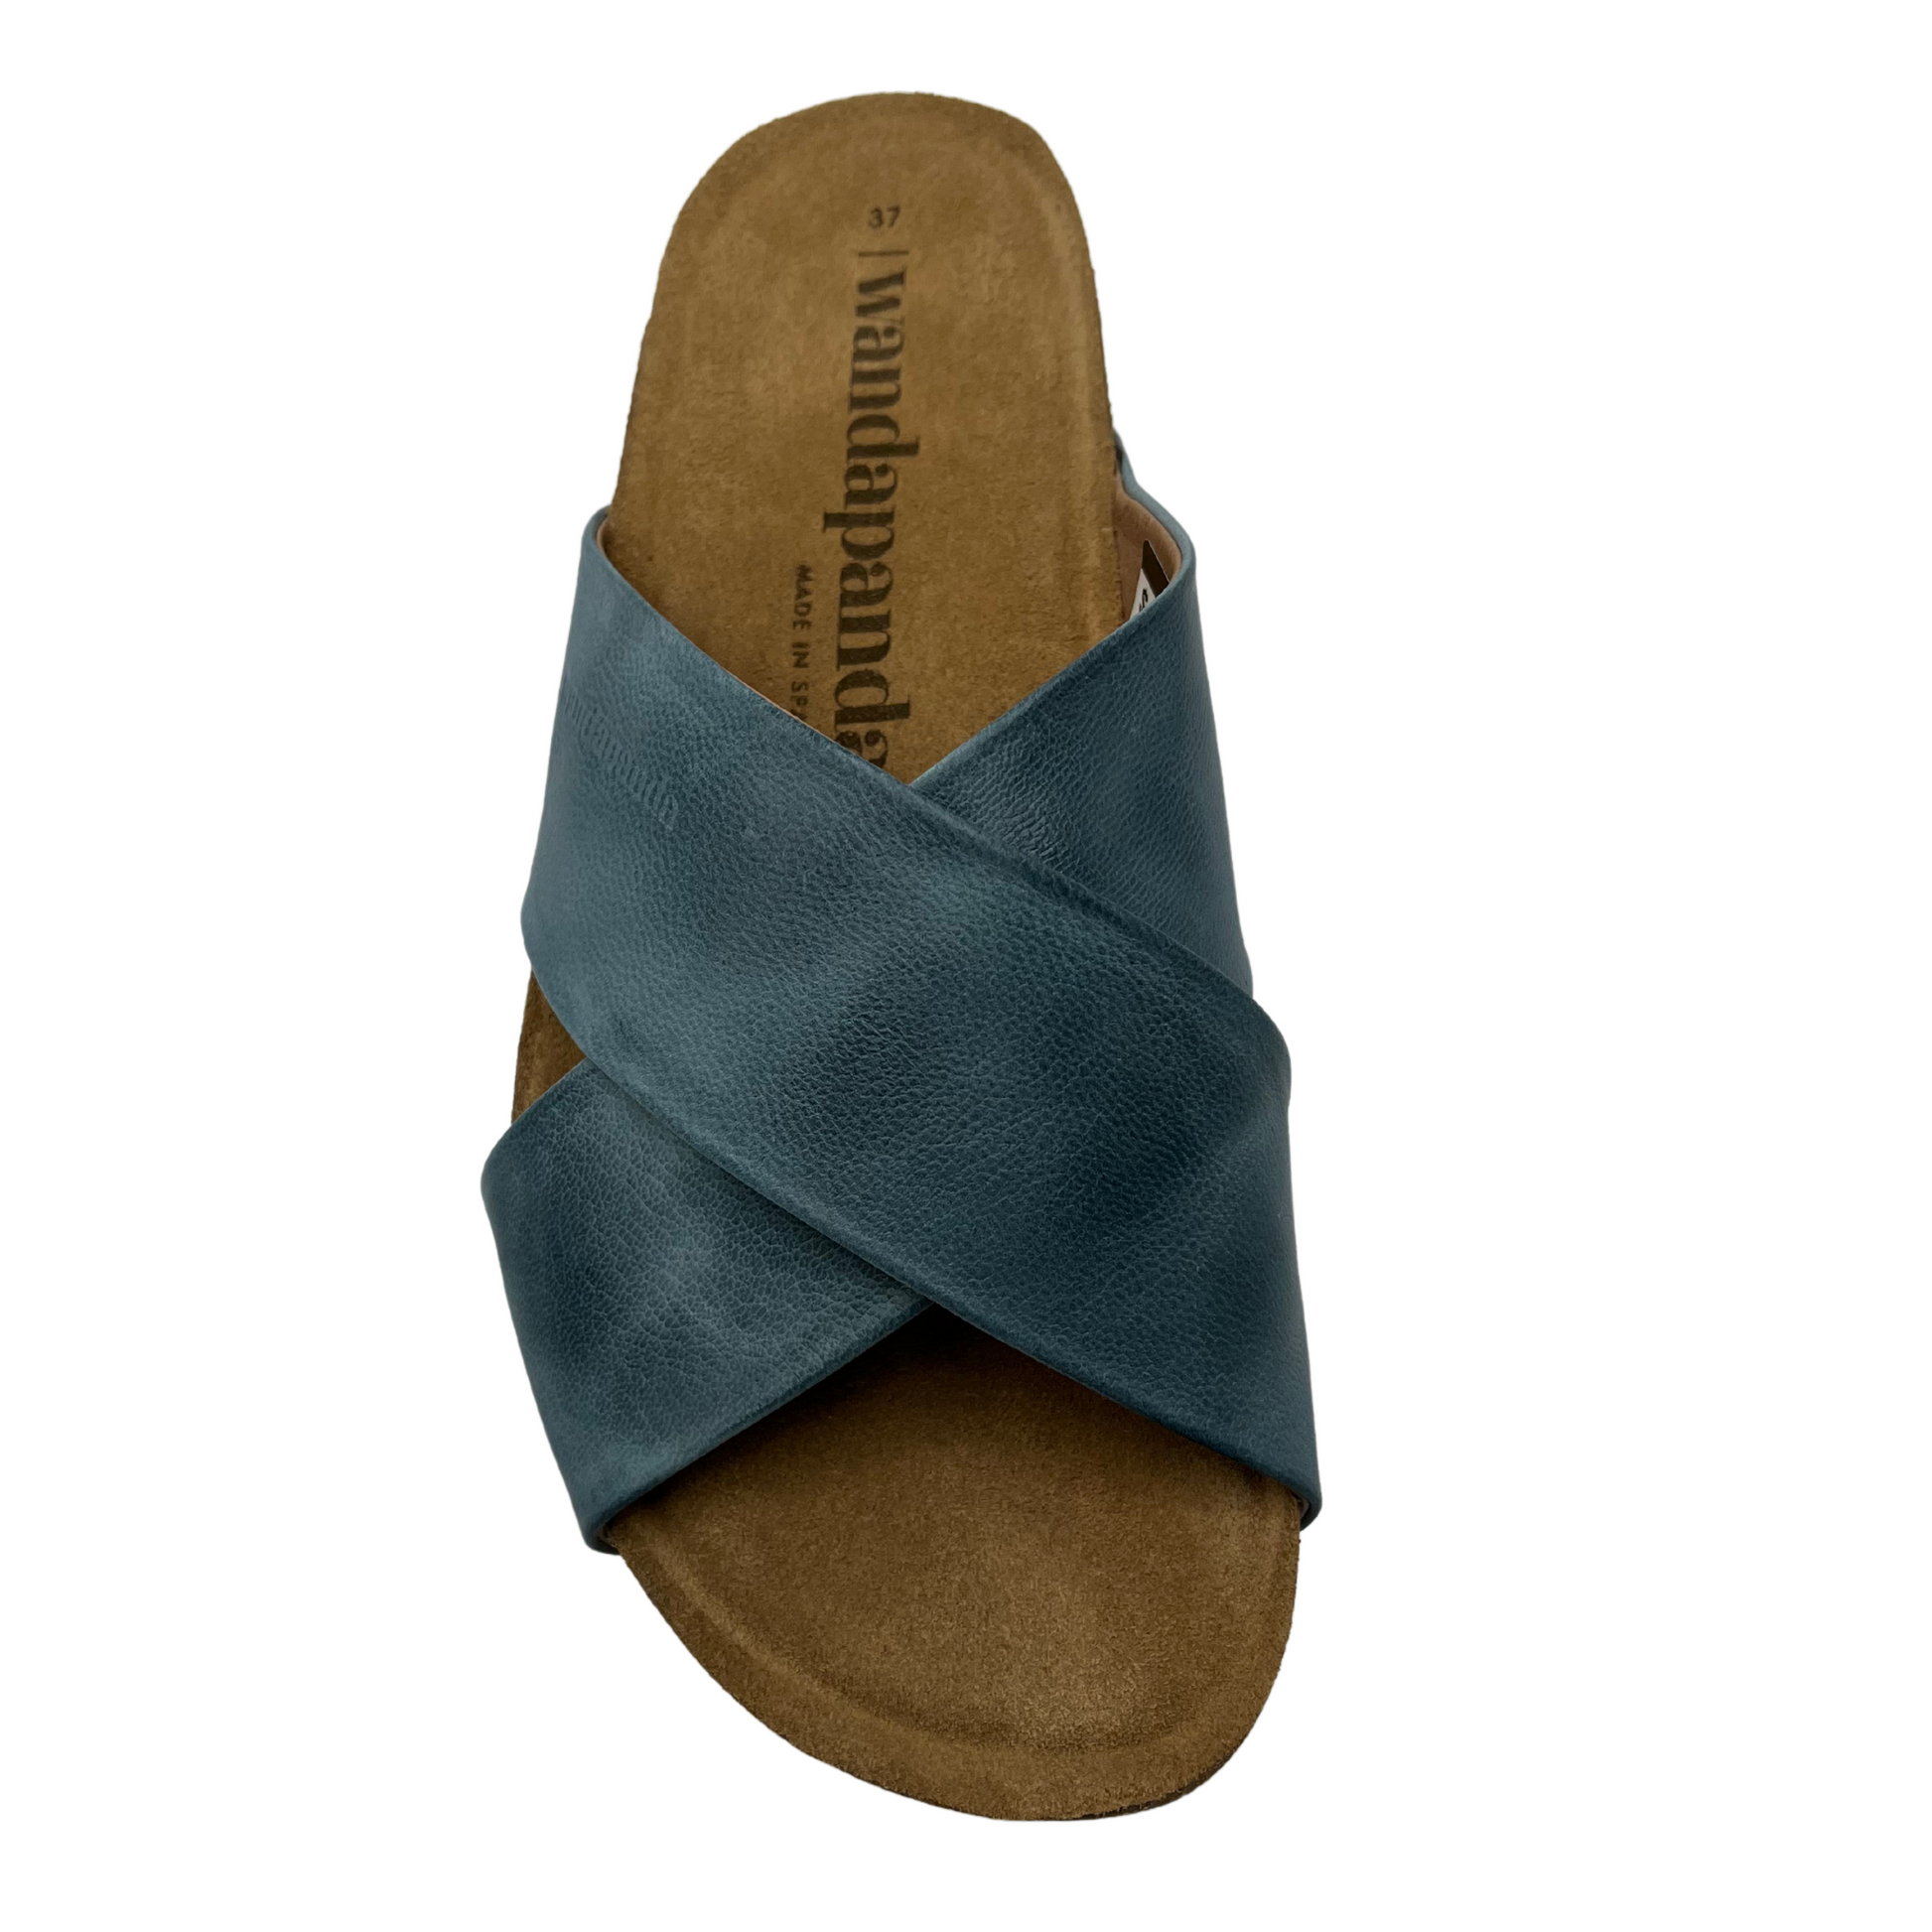 Top view of sandal with blue leather cross straps